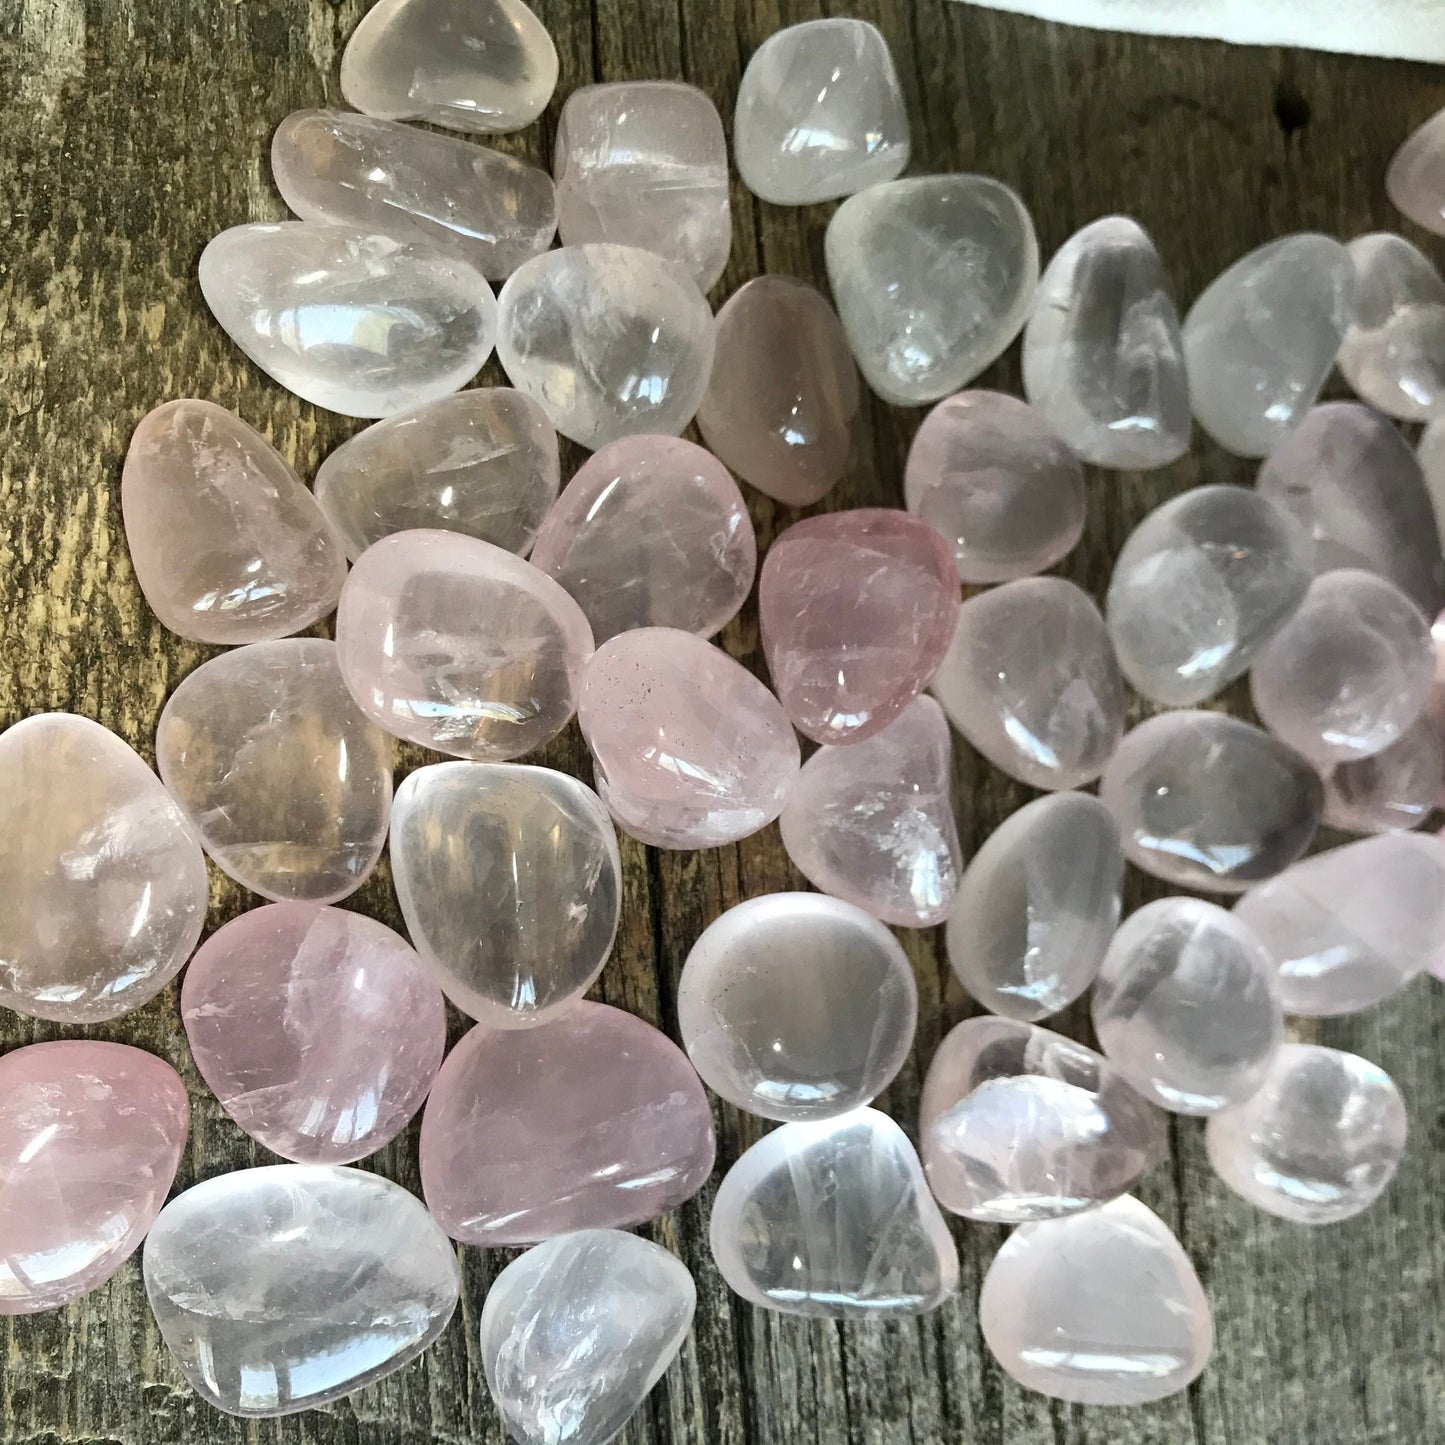 Rose Quartz, Polished Tumbled Crystal (Approx. 3/4" - 1") Polished Stone for the Heart Chakra, for Wire Wrapping or Crystal Grid Supply BIN-1378